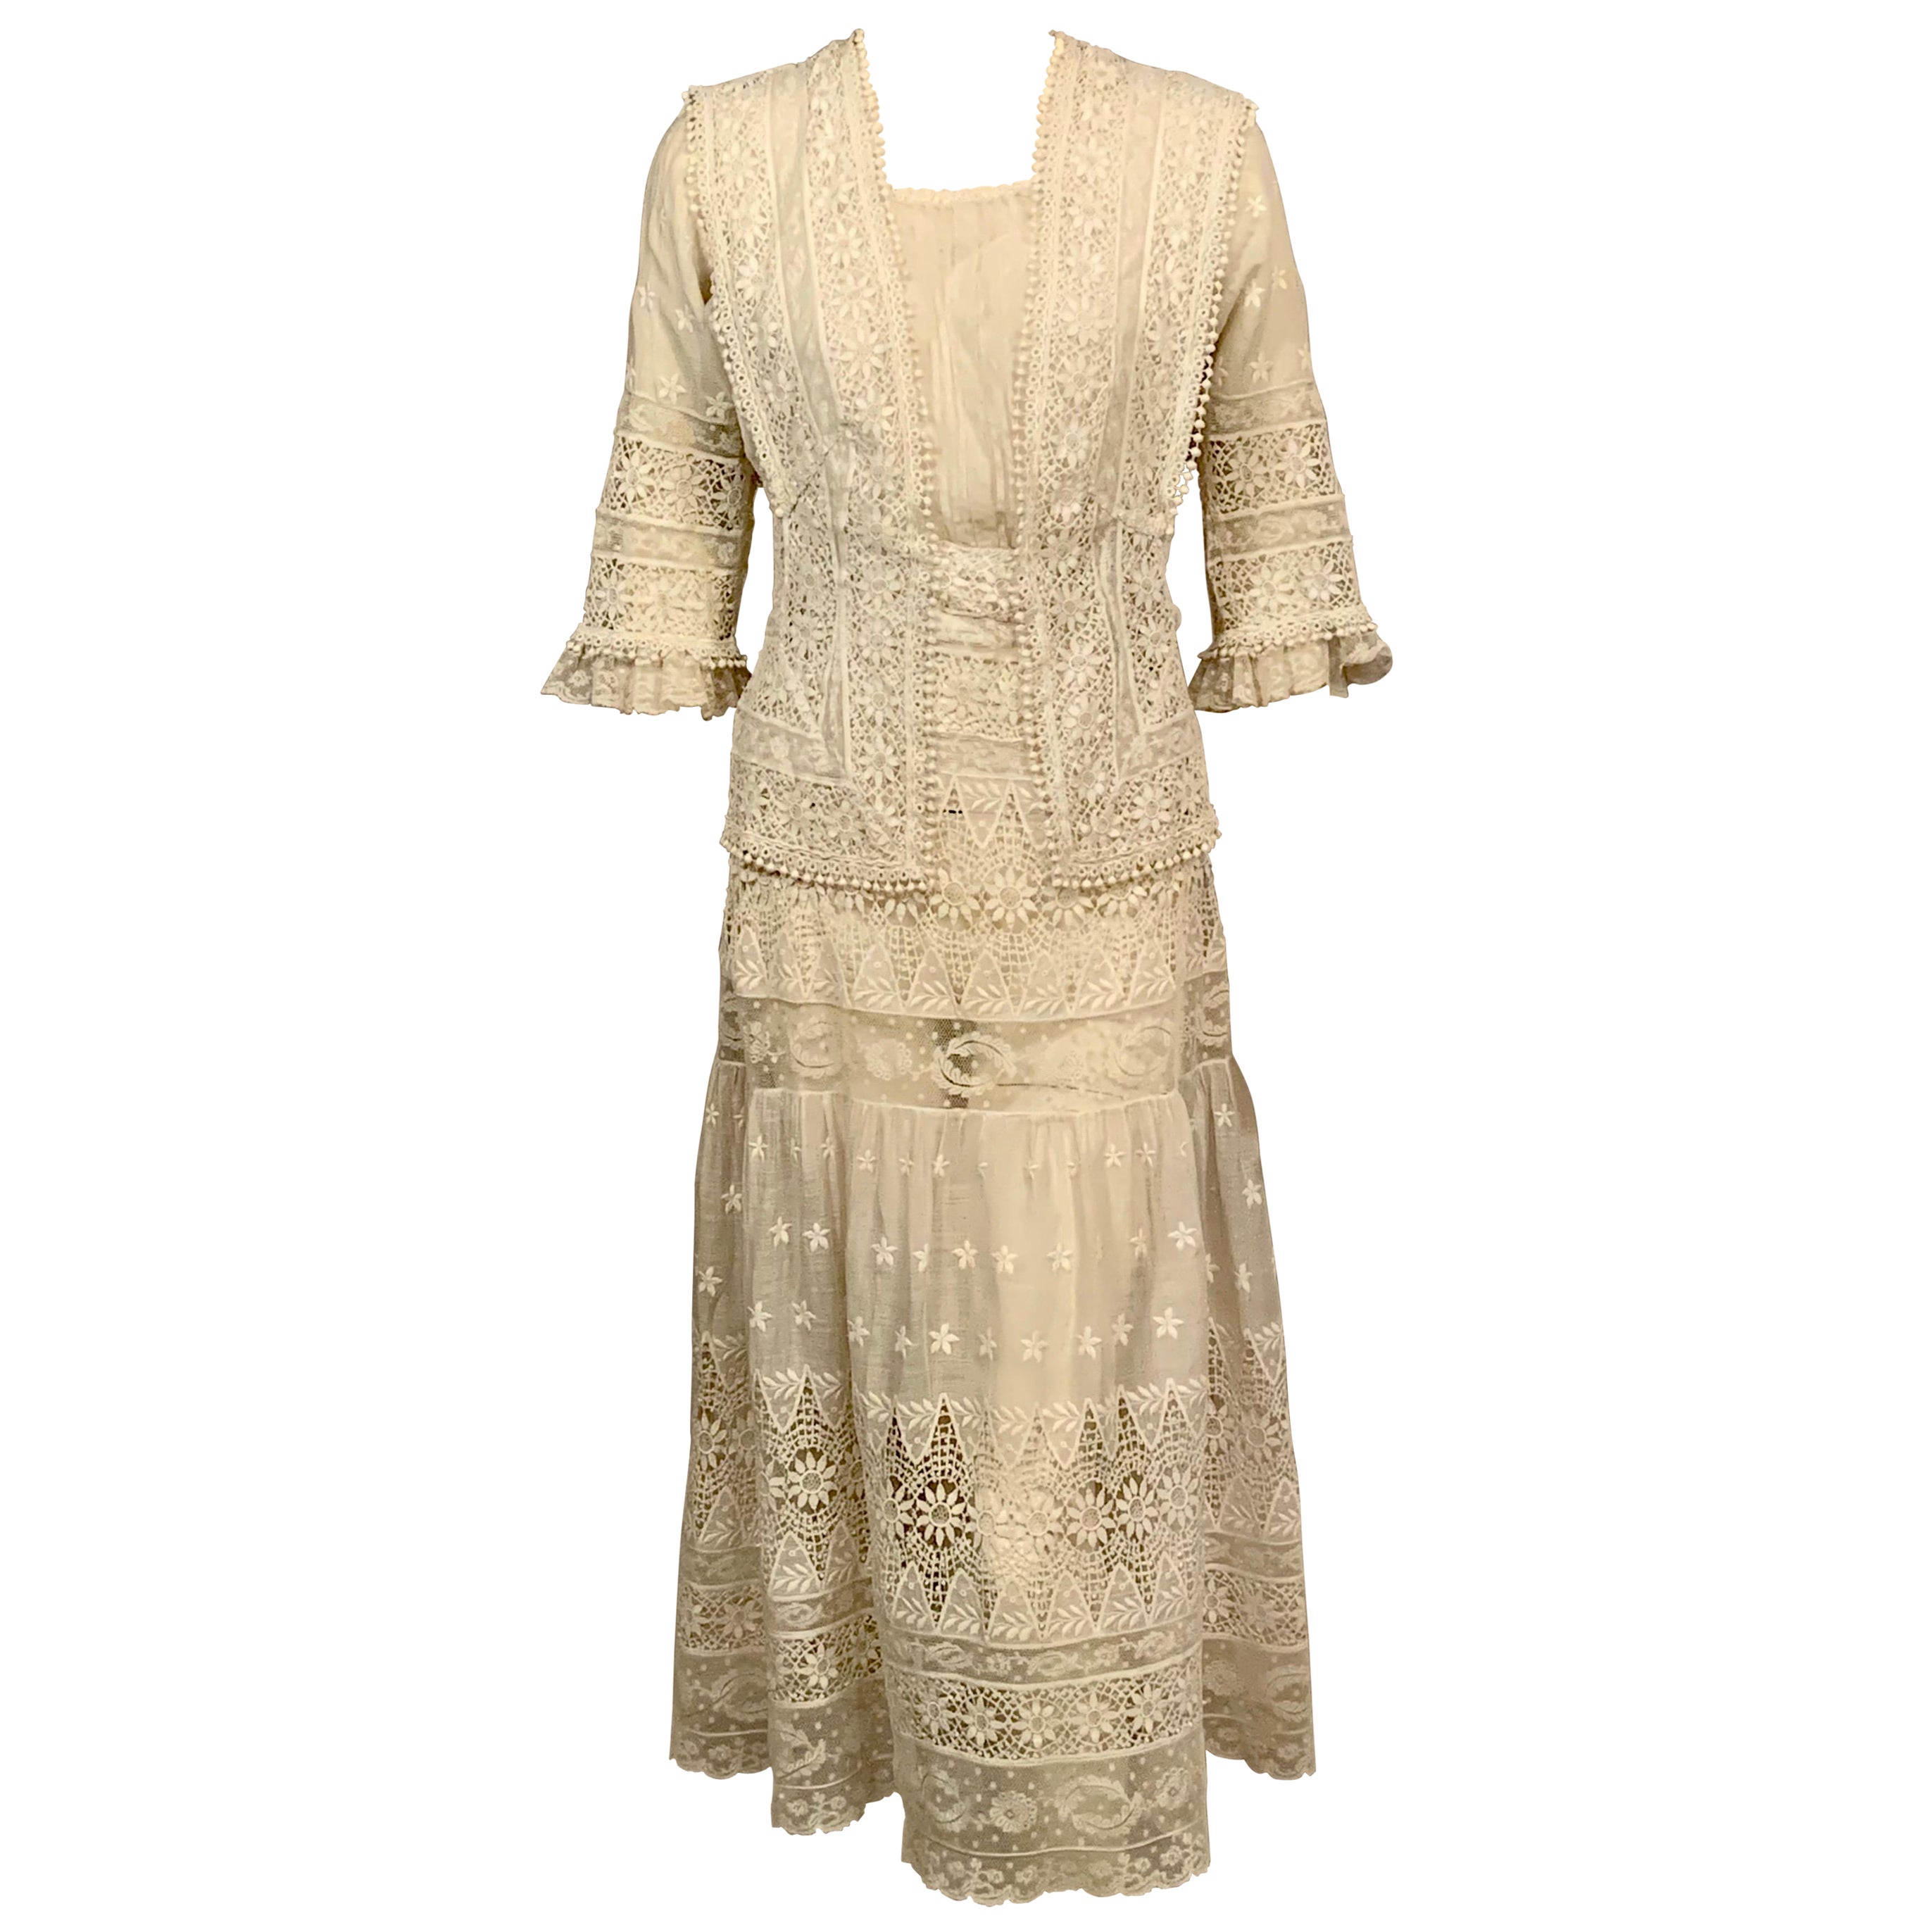 Vintage Edwardian Embroidered Linen and Lace White Dress